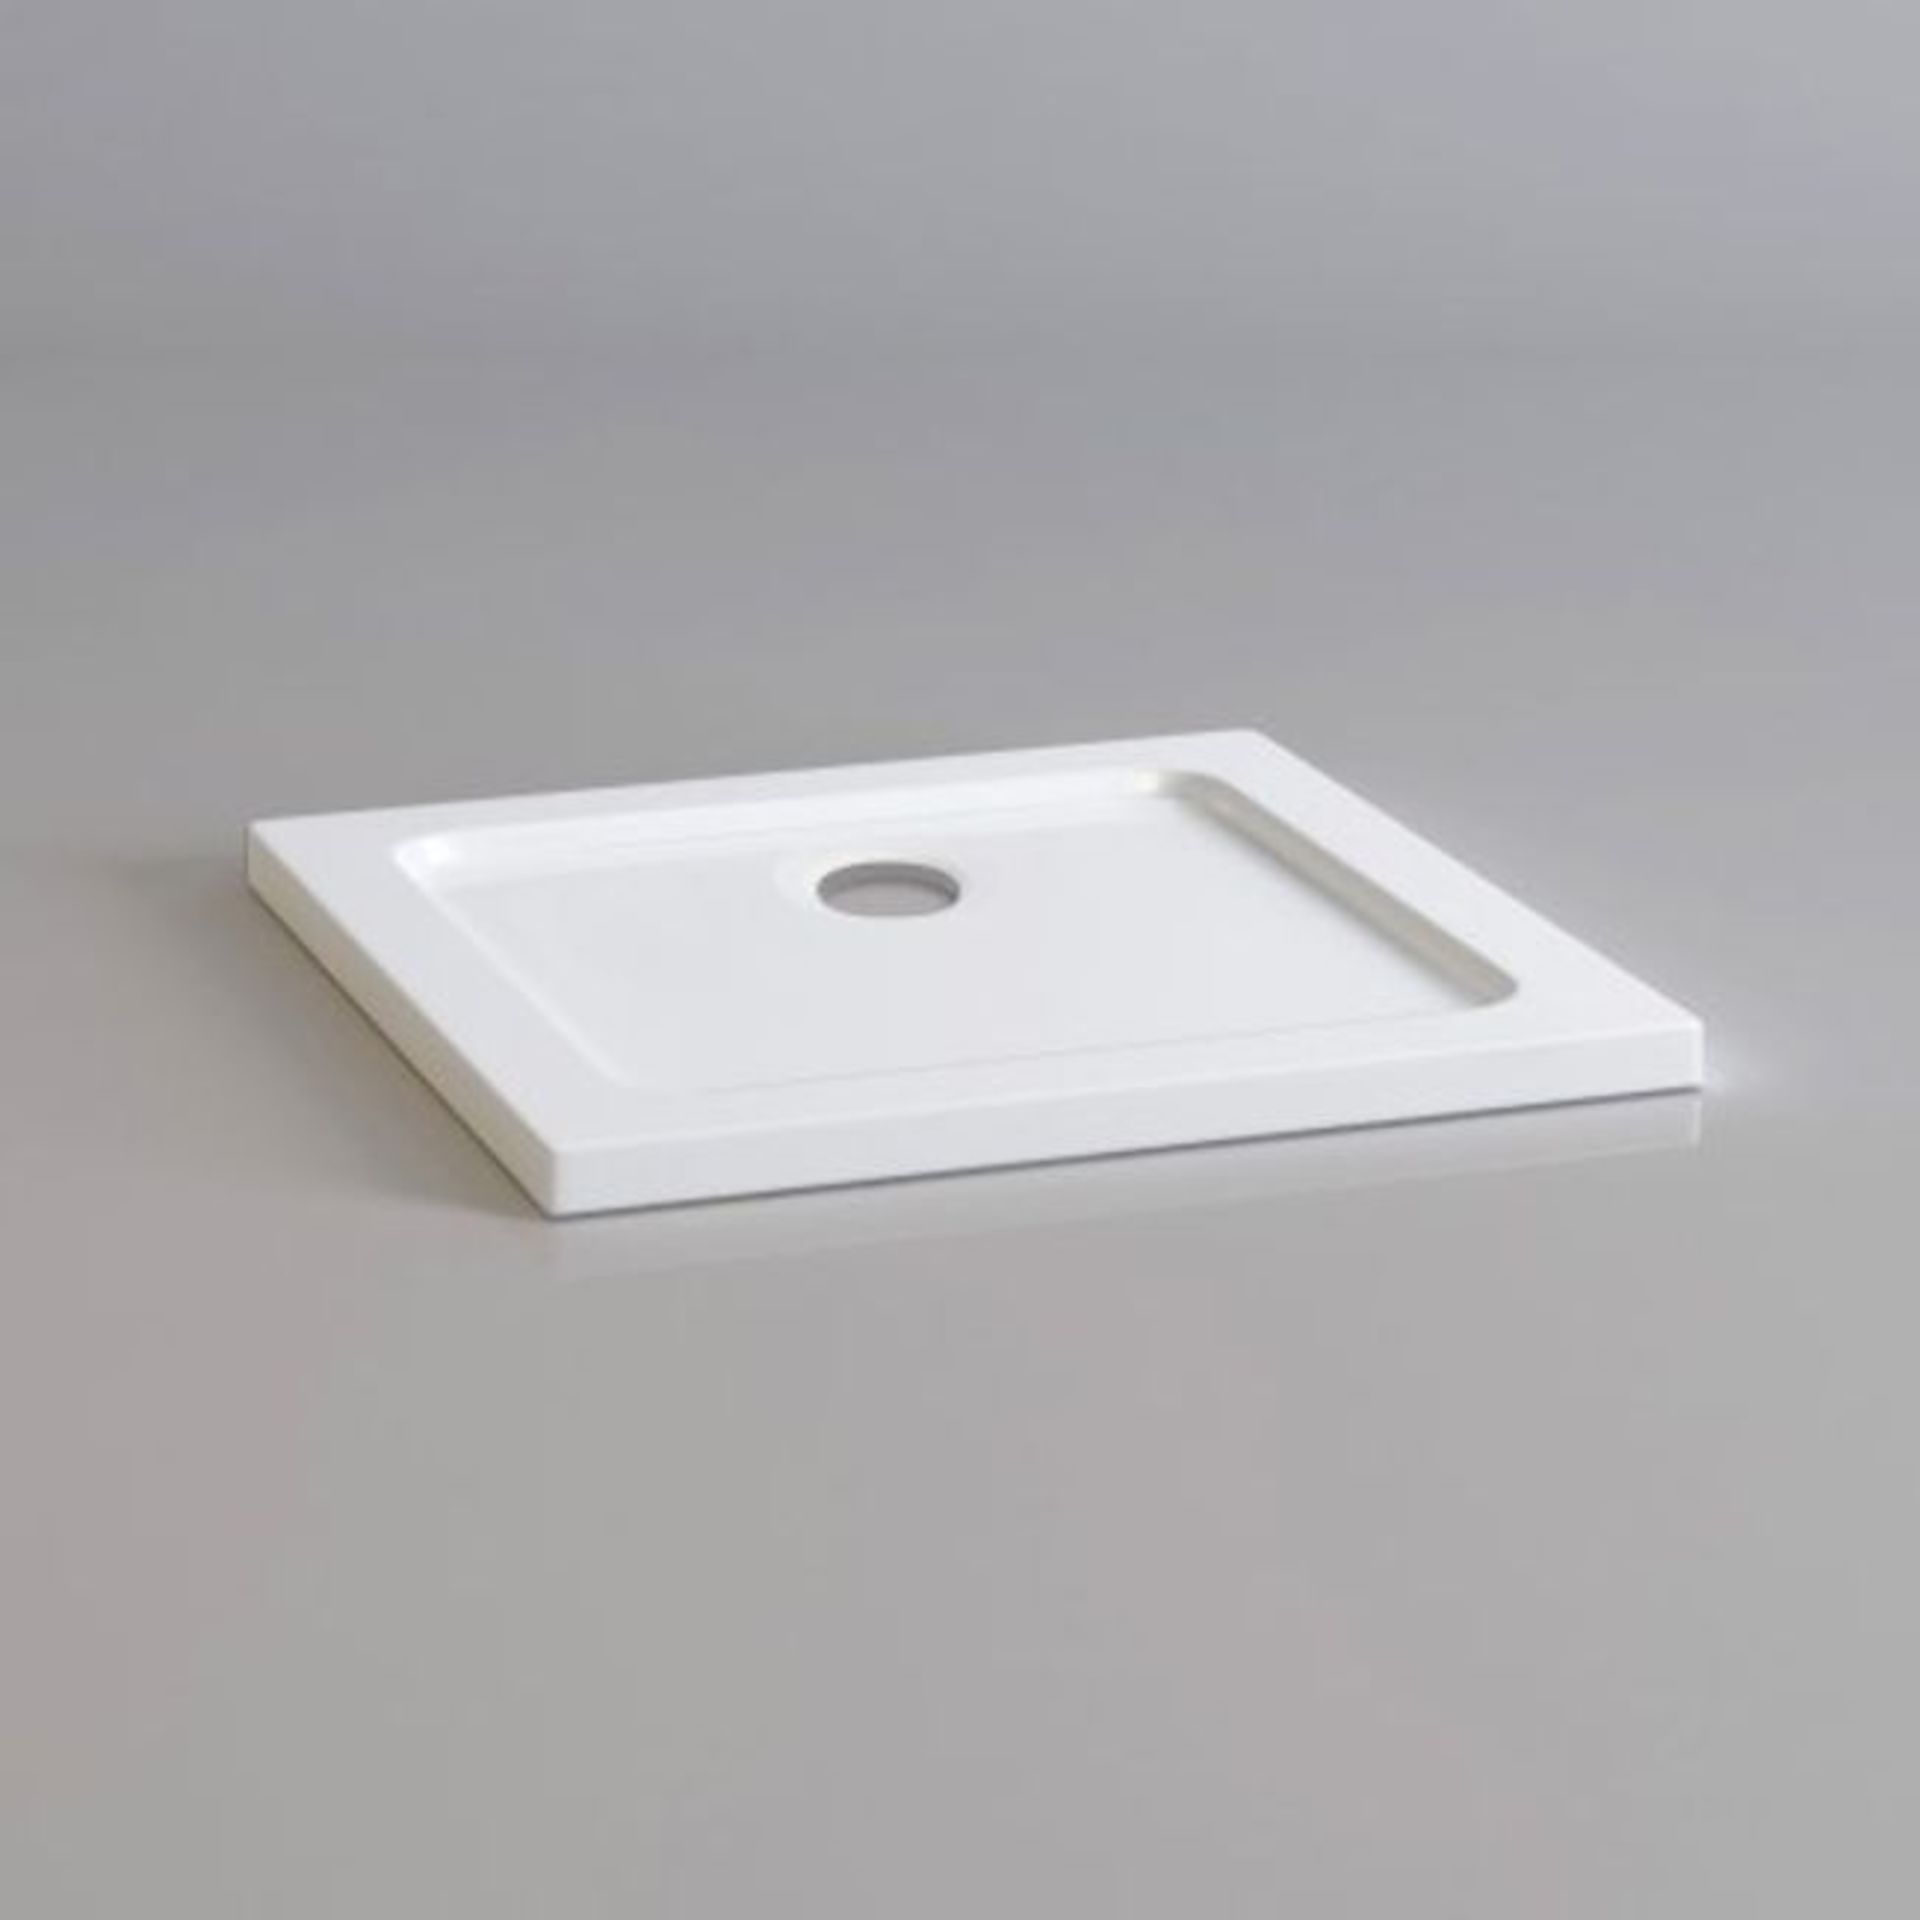 NEW (C191) 900x760mm Square Ultra Slim Stone Shower Tray. RRP £249.99.Designed and made care... - Image 2 of 2